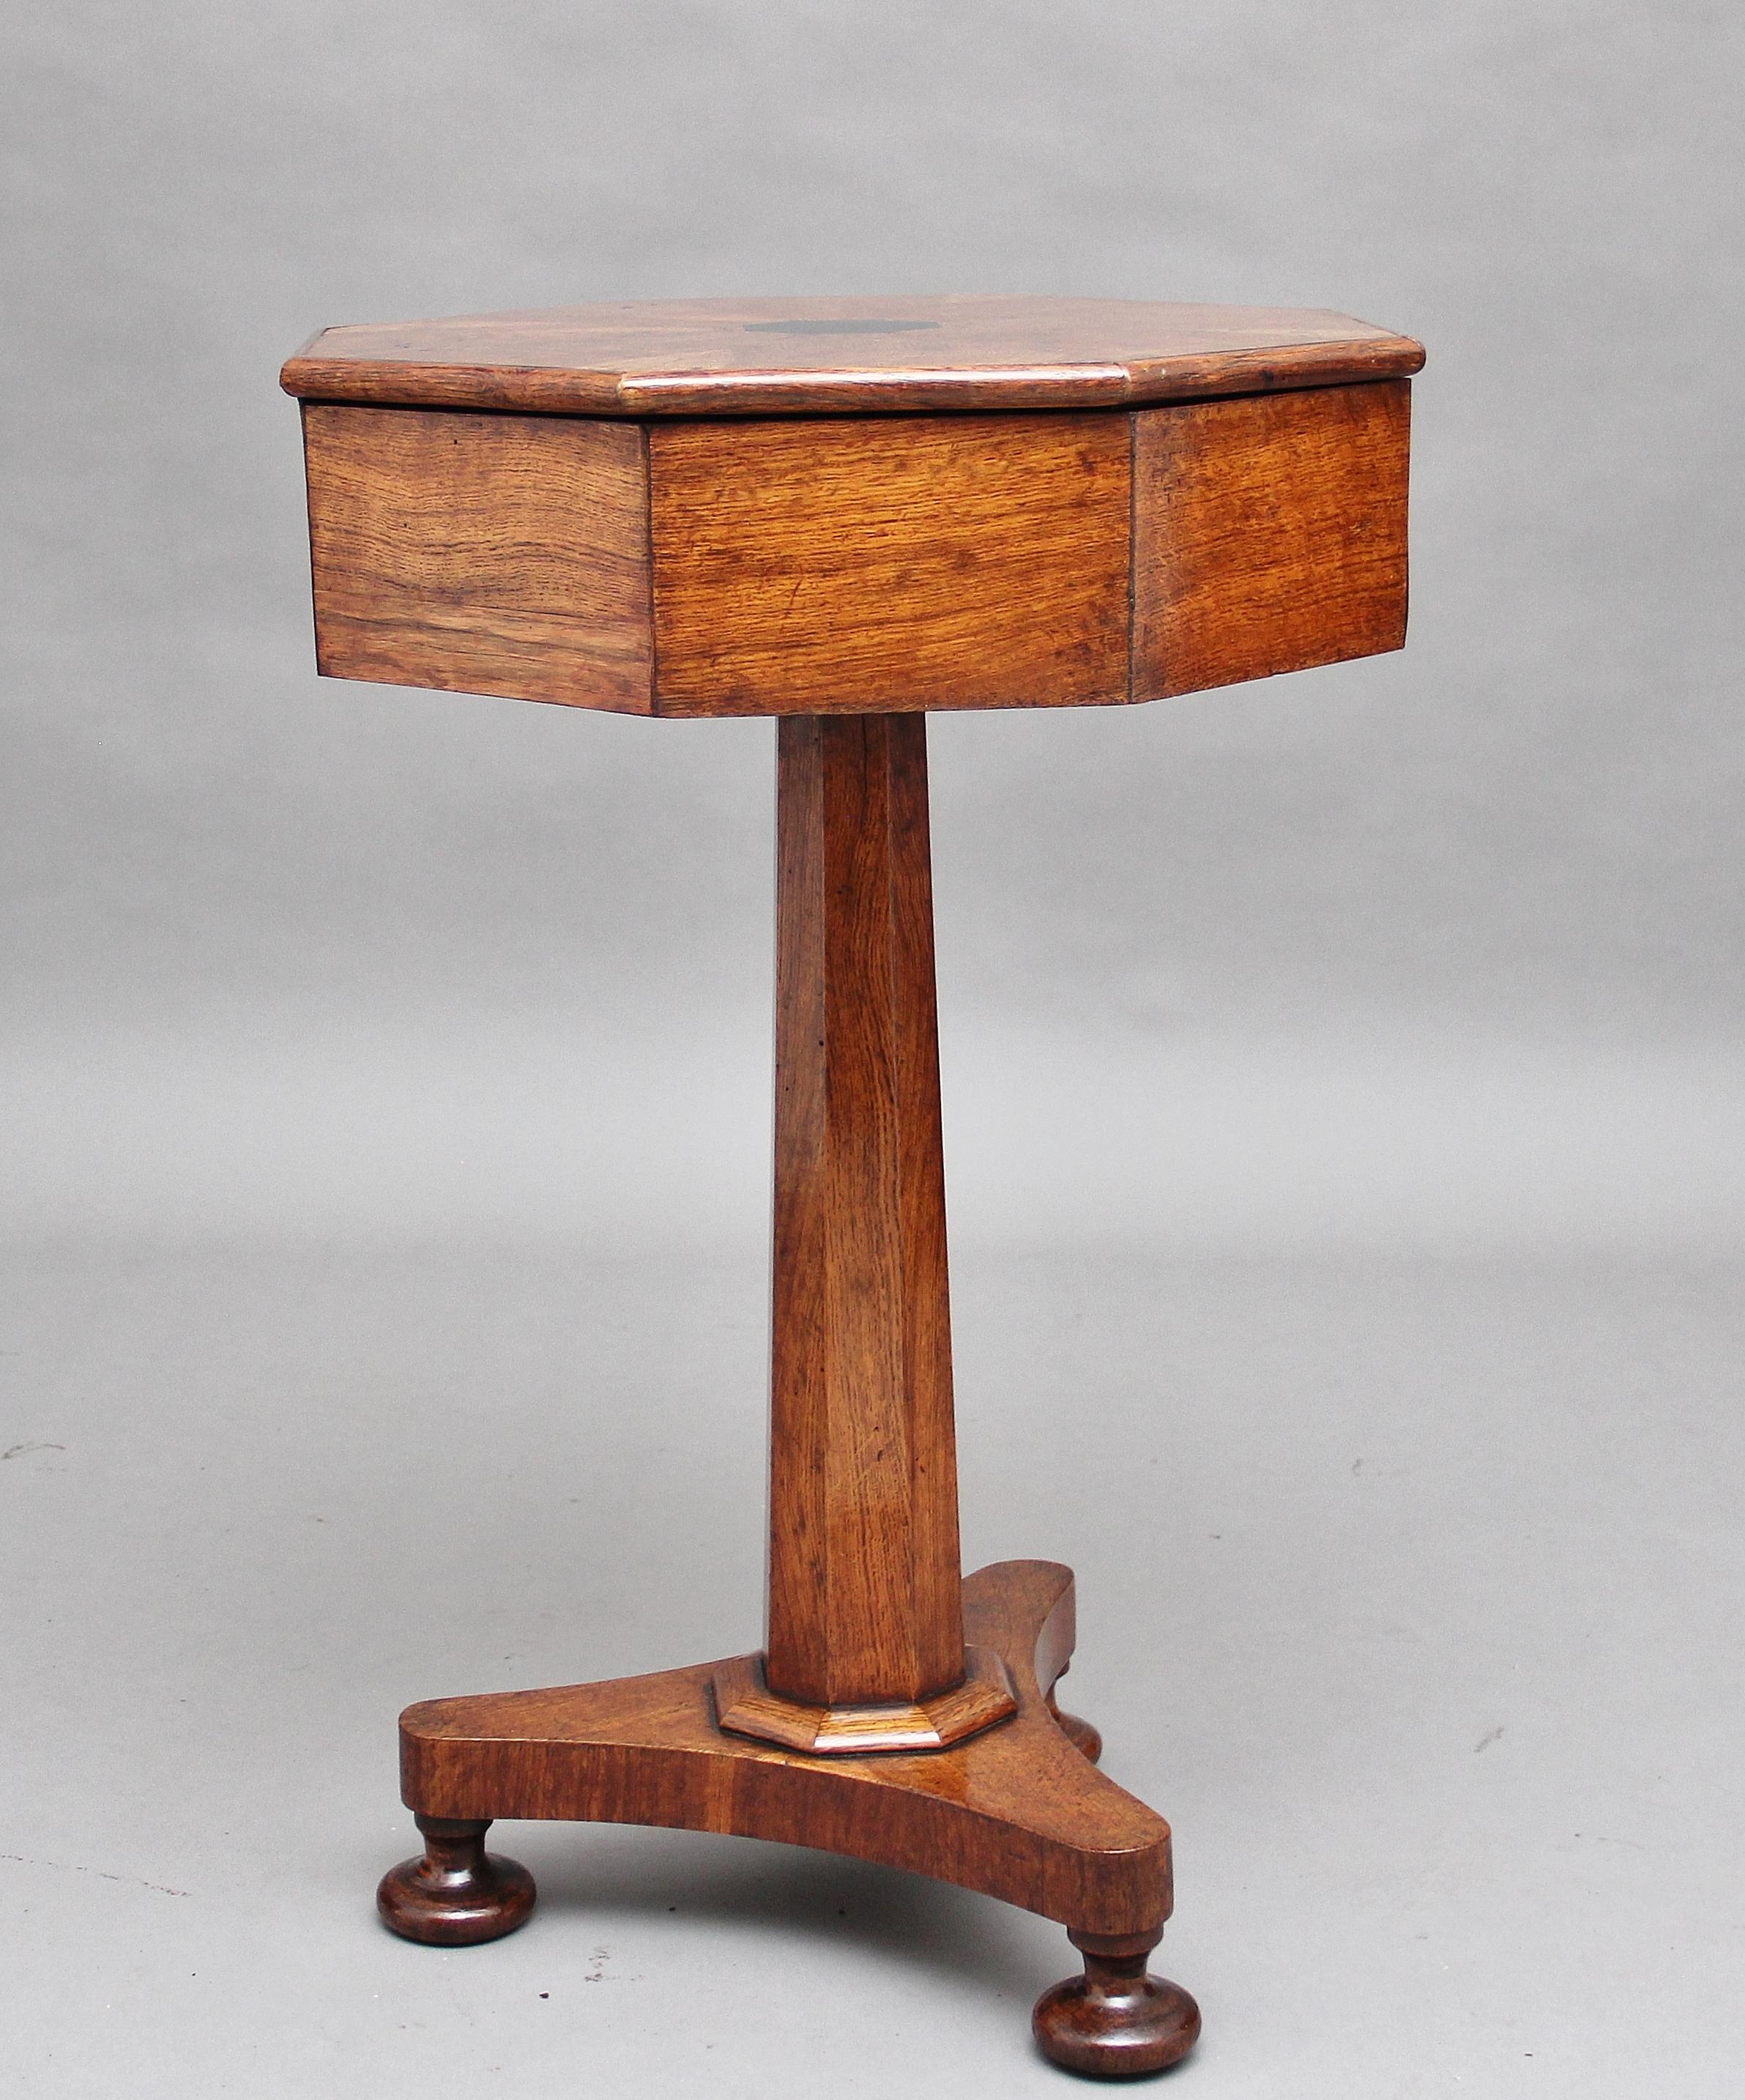 English 19th Century Oak Work Table with Segmented Top and Ebony Inlay